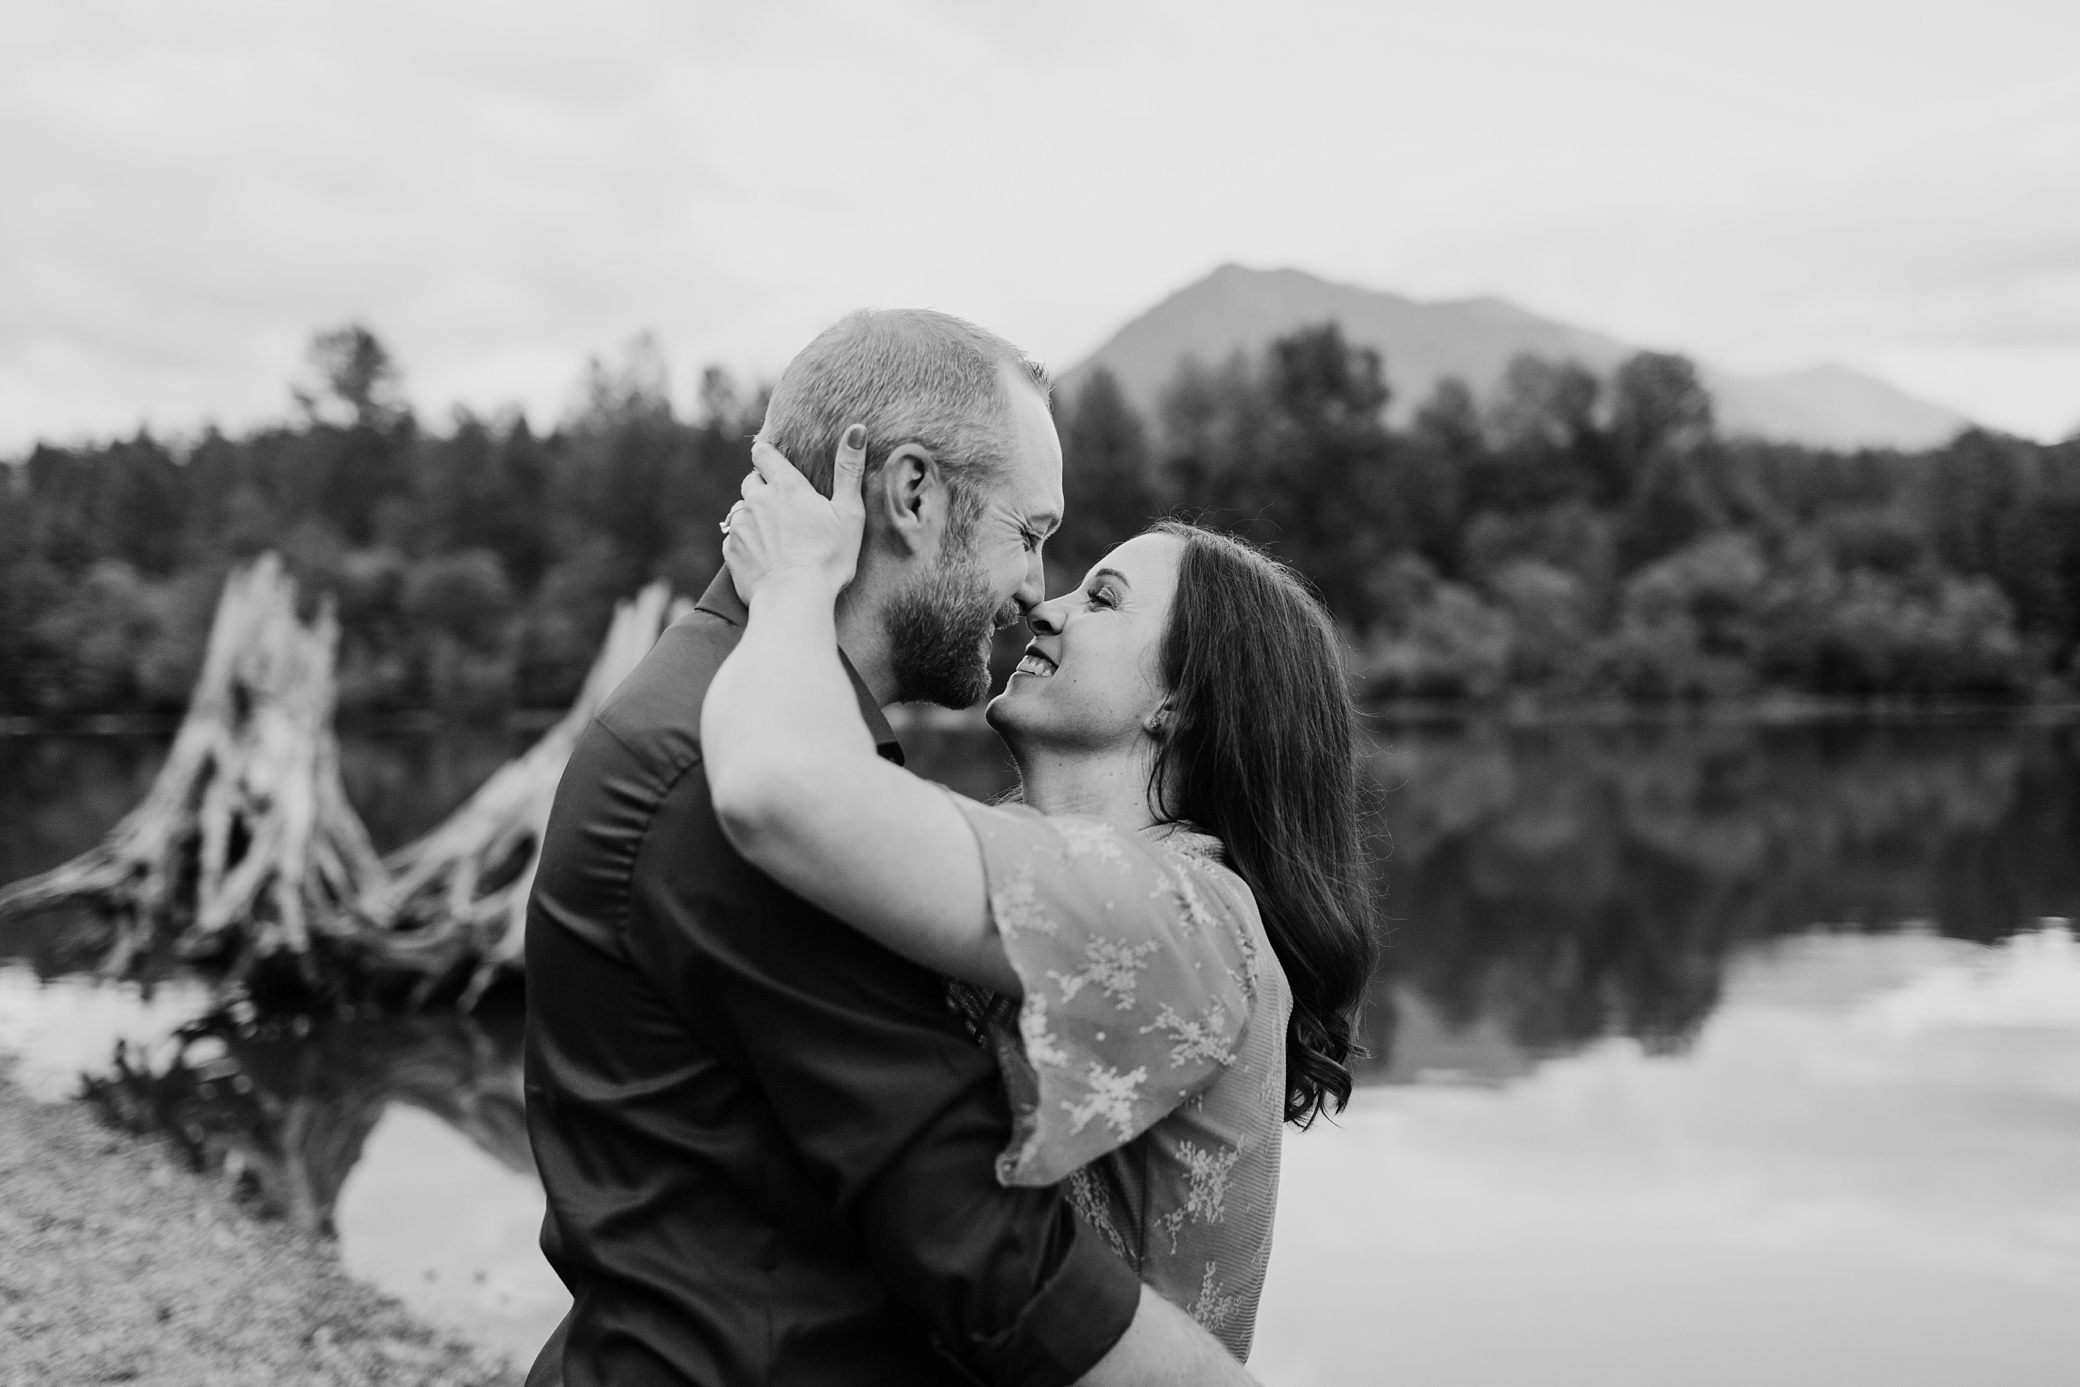 Summer engagement session at Rattlesnake Lake in North Bend, WA. Photographed by Snoqualmie Wedding Photographer, Megan Montalvo Photography